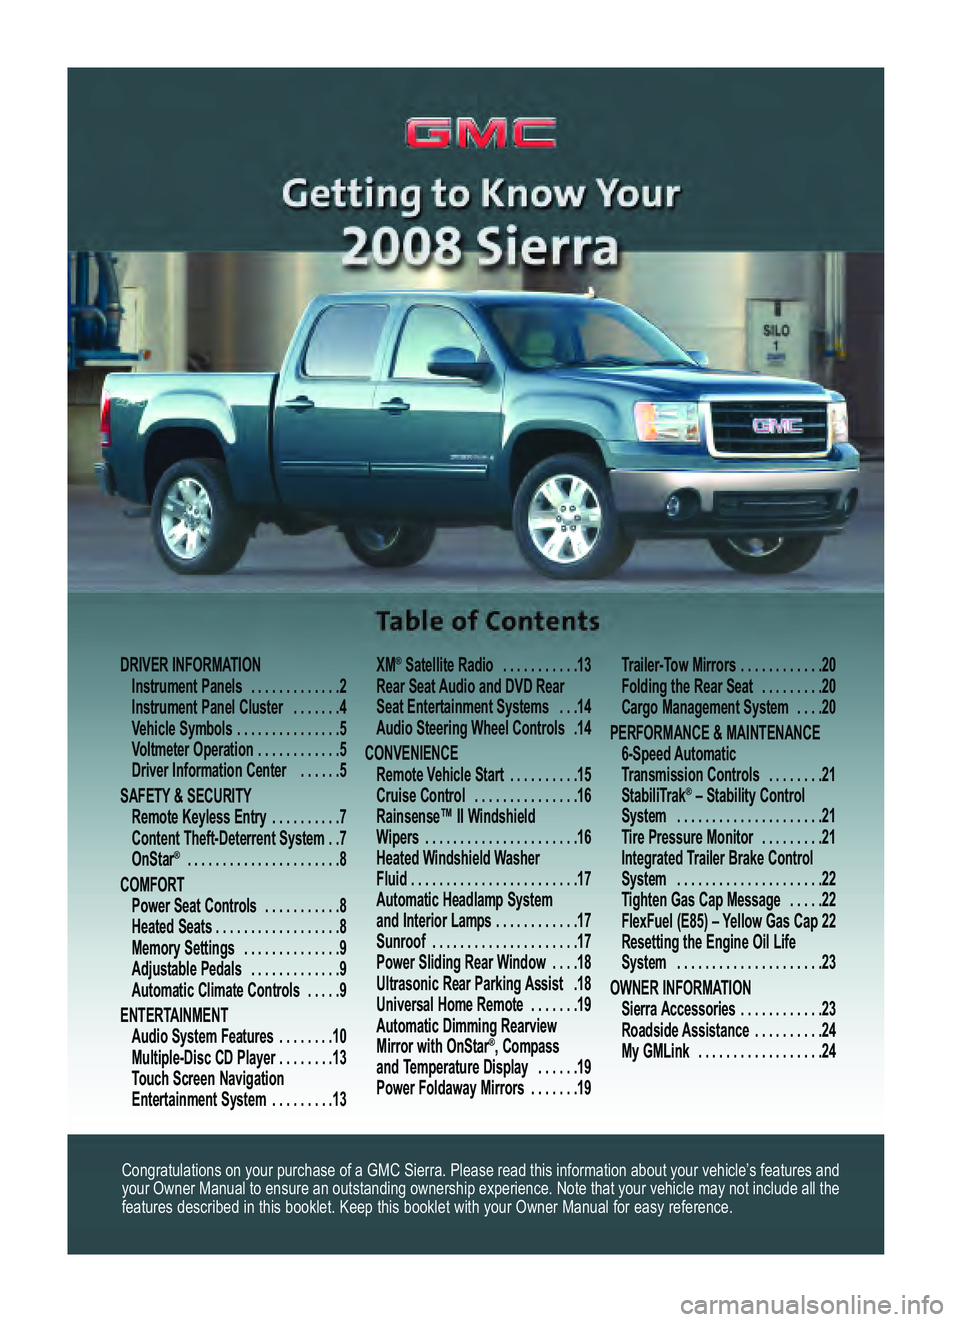 GMC SIERRA 2008  Get To Know Guide 